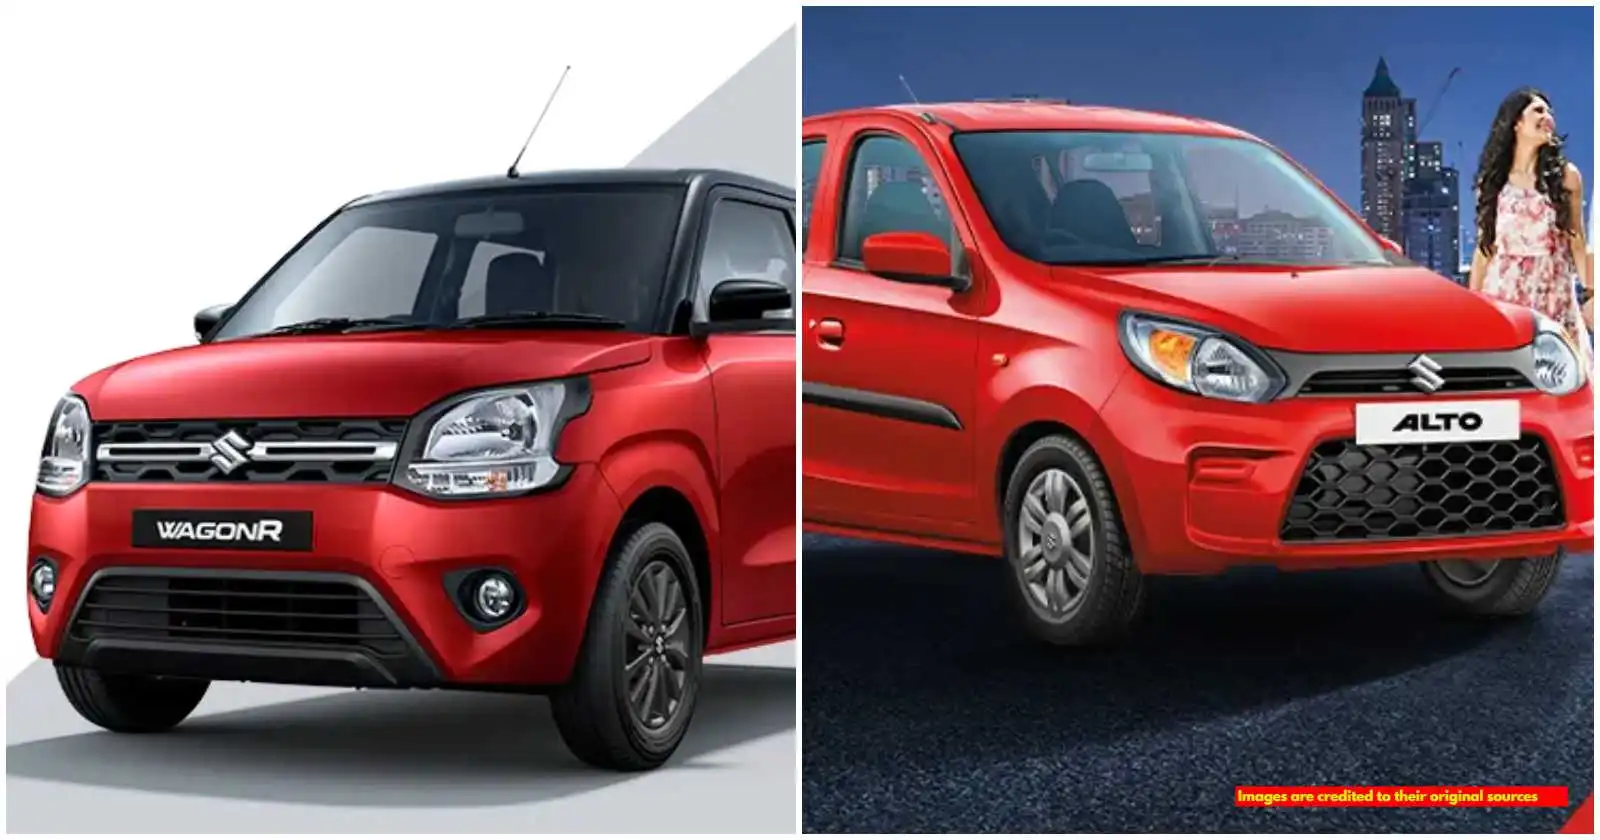 Top Mileage Cars- Below are the Cars which gives you best mileage - ಬೆಸ್ಟ್ ಮೈಲೇಜ್ ನೀಡುವ ಕಾರುಗಳು